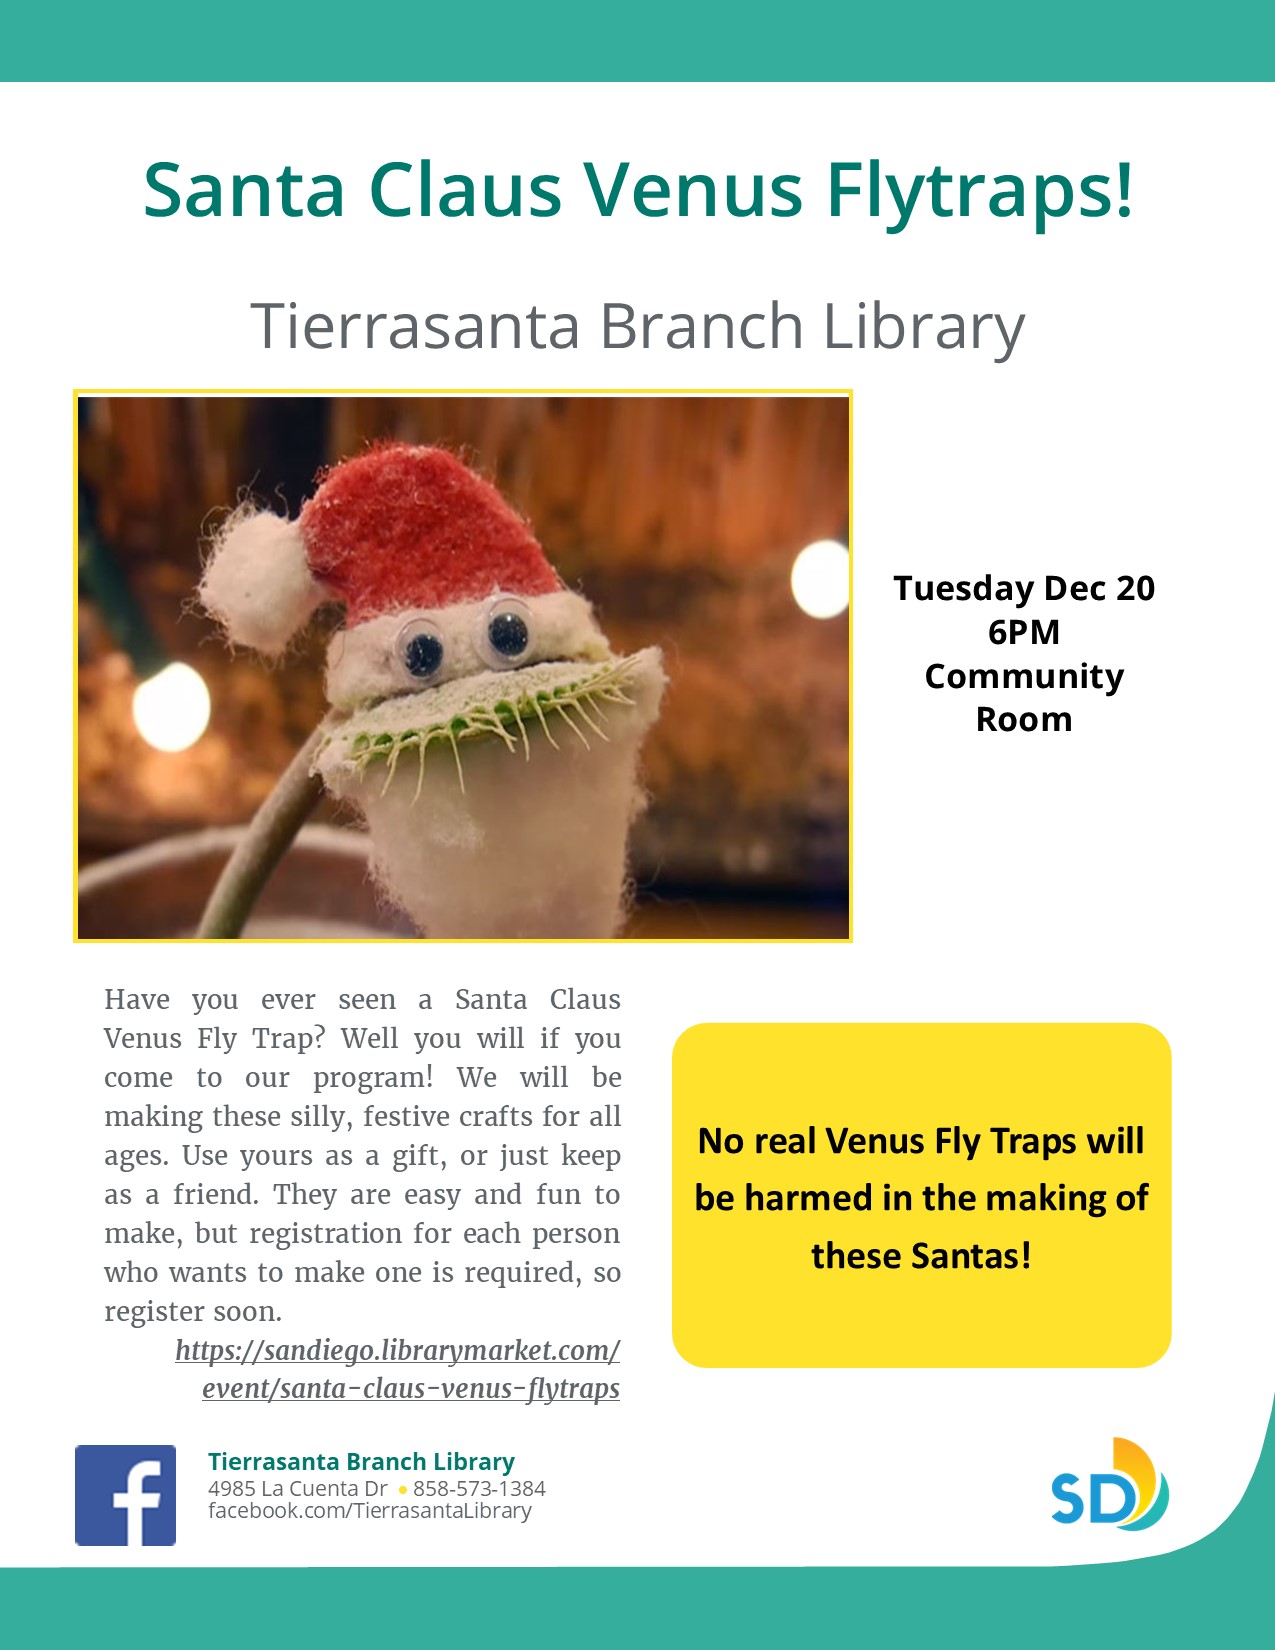 Flyer with a venus flytrap decorated with googly eyes, a santa hat and beard